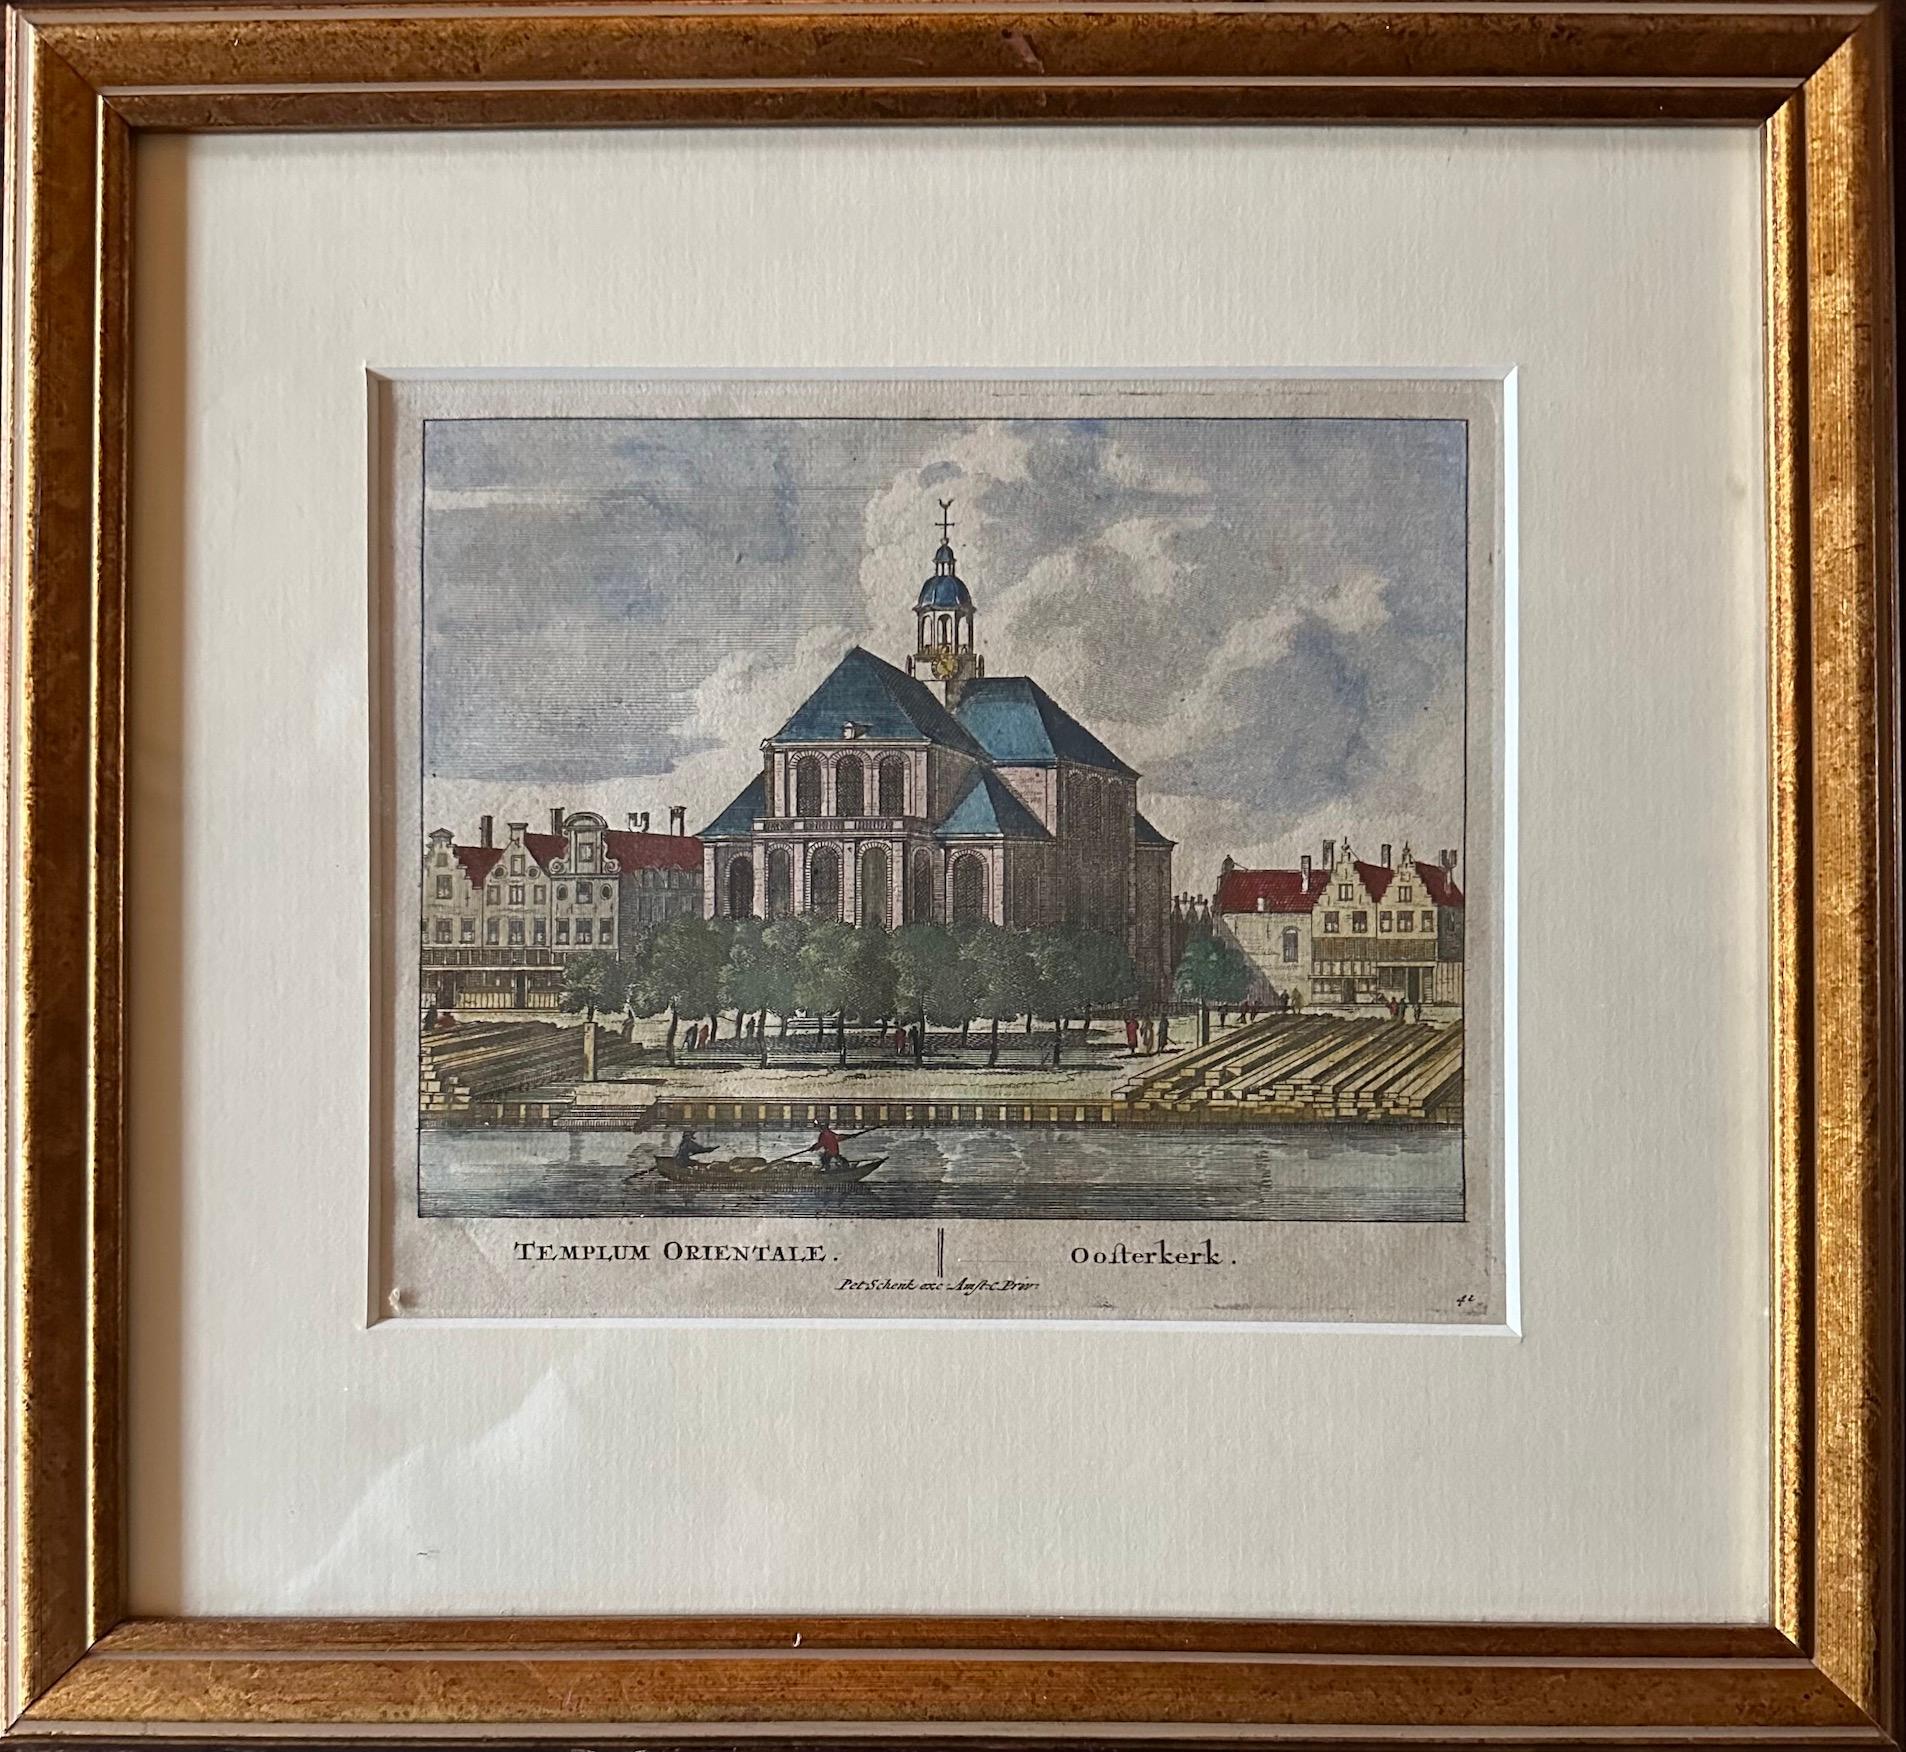 Original hand-coloured engraving anno 1710 with title: Templum Orientale / Oosterkerk.

The Oosterkerk is a 17th-century church building on the Wittenburgergracht in Wittenburg (Amsterdam). The church was built in the period 1669-1671 according to a